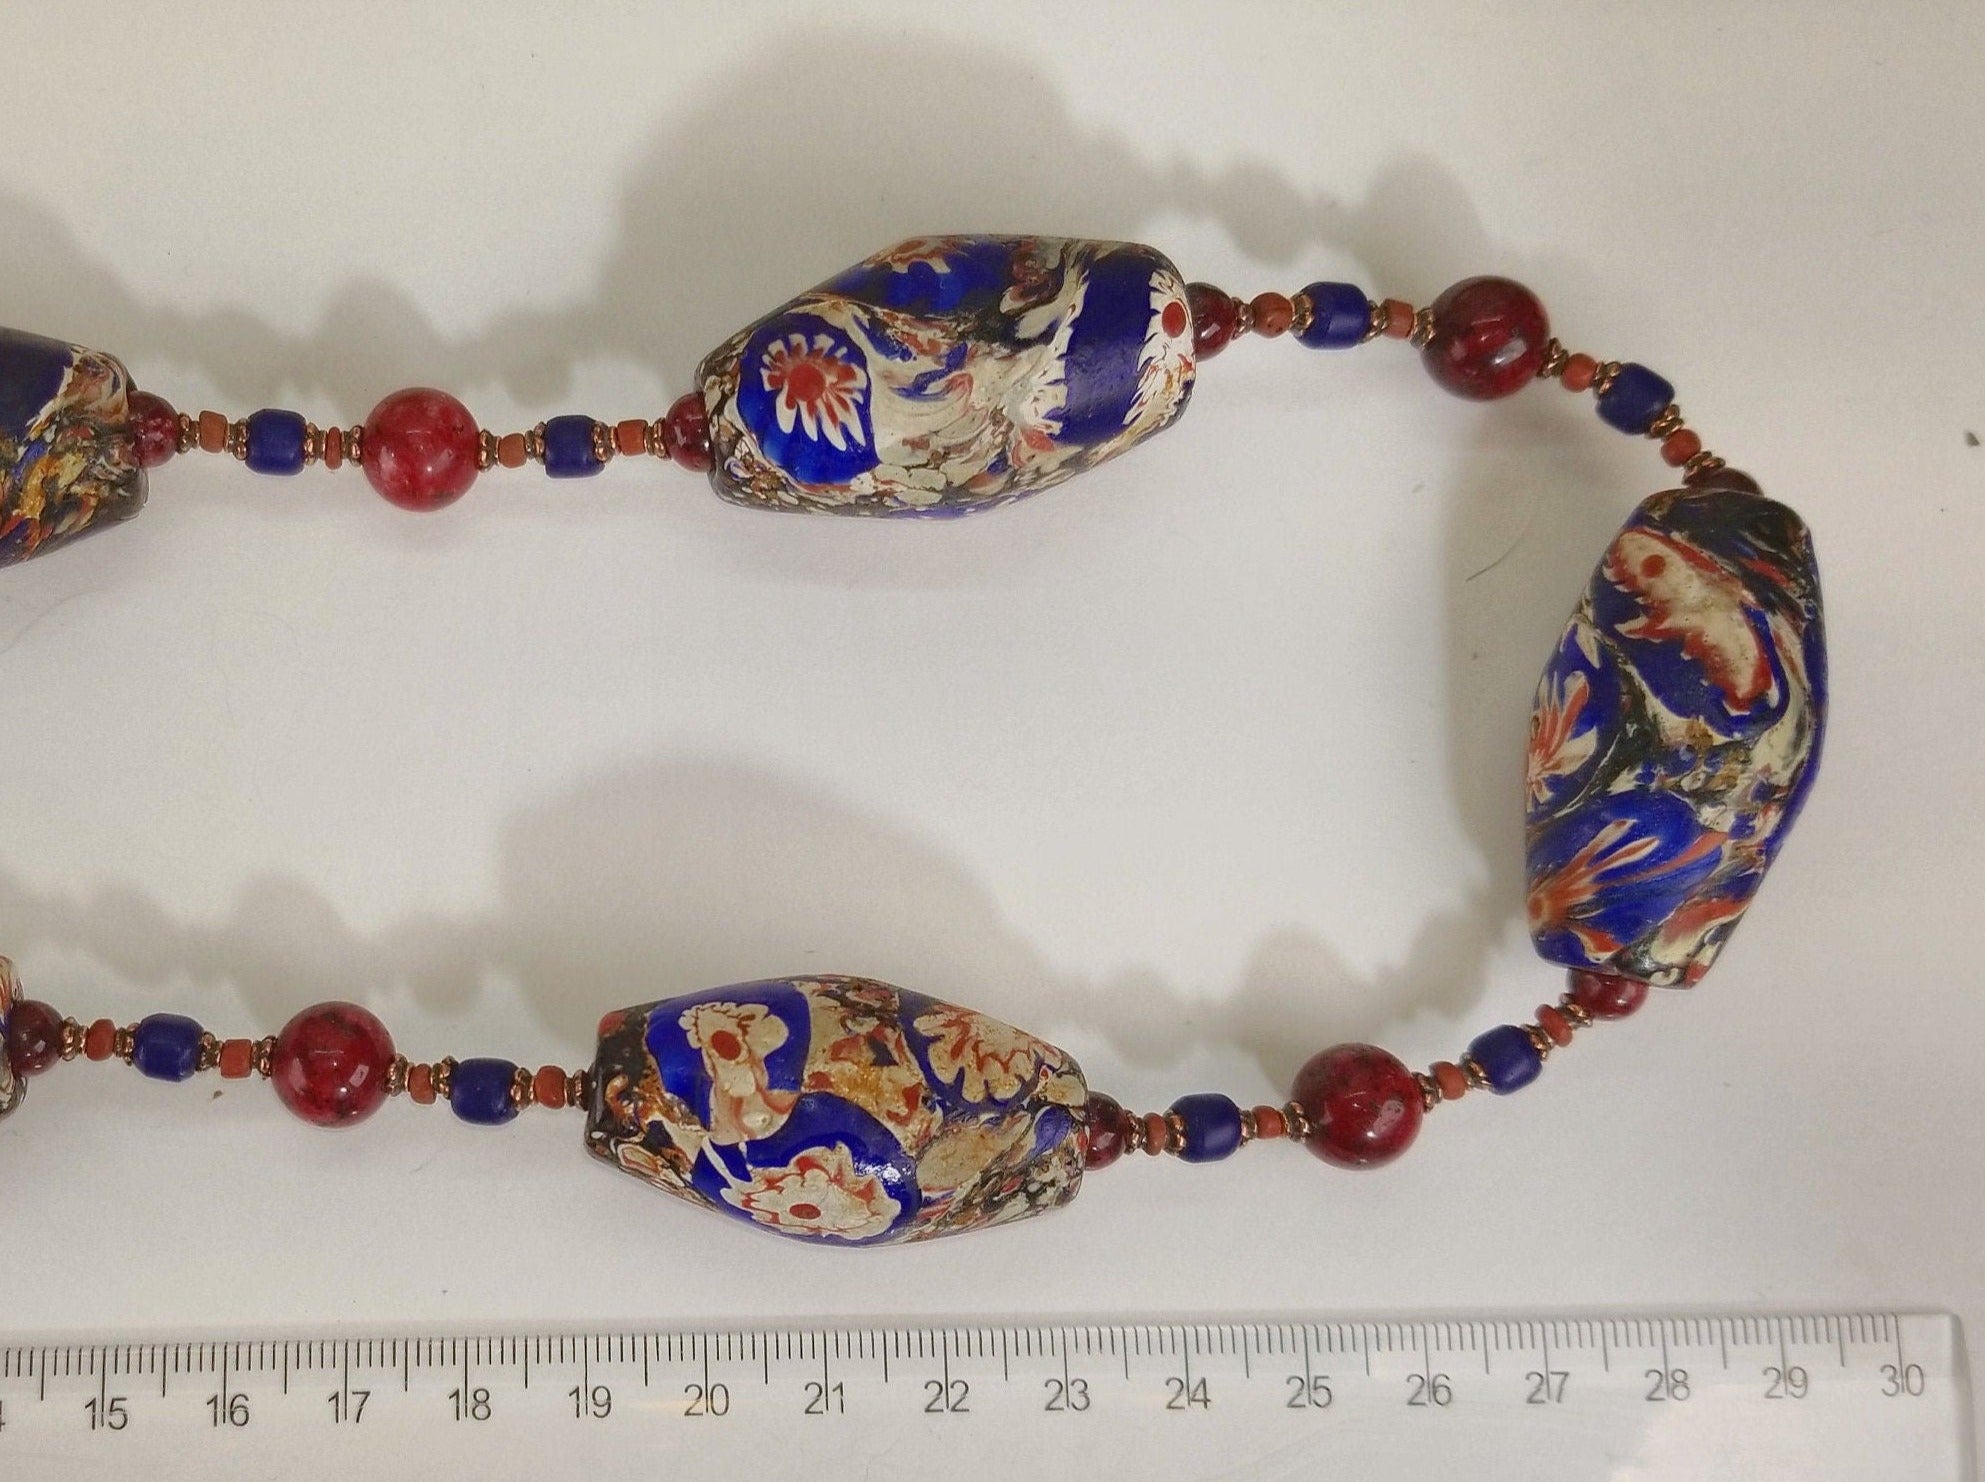 3 Antique Vintage Himalayan Trade Glass Beads Necklace Mala From 18 Century  | eBay